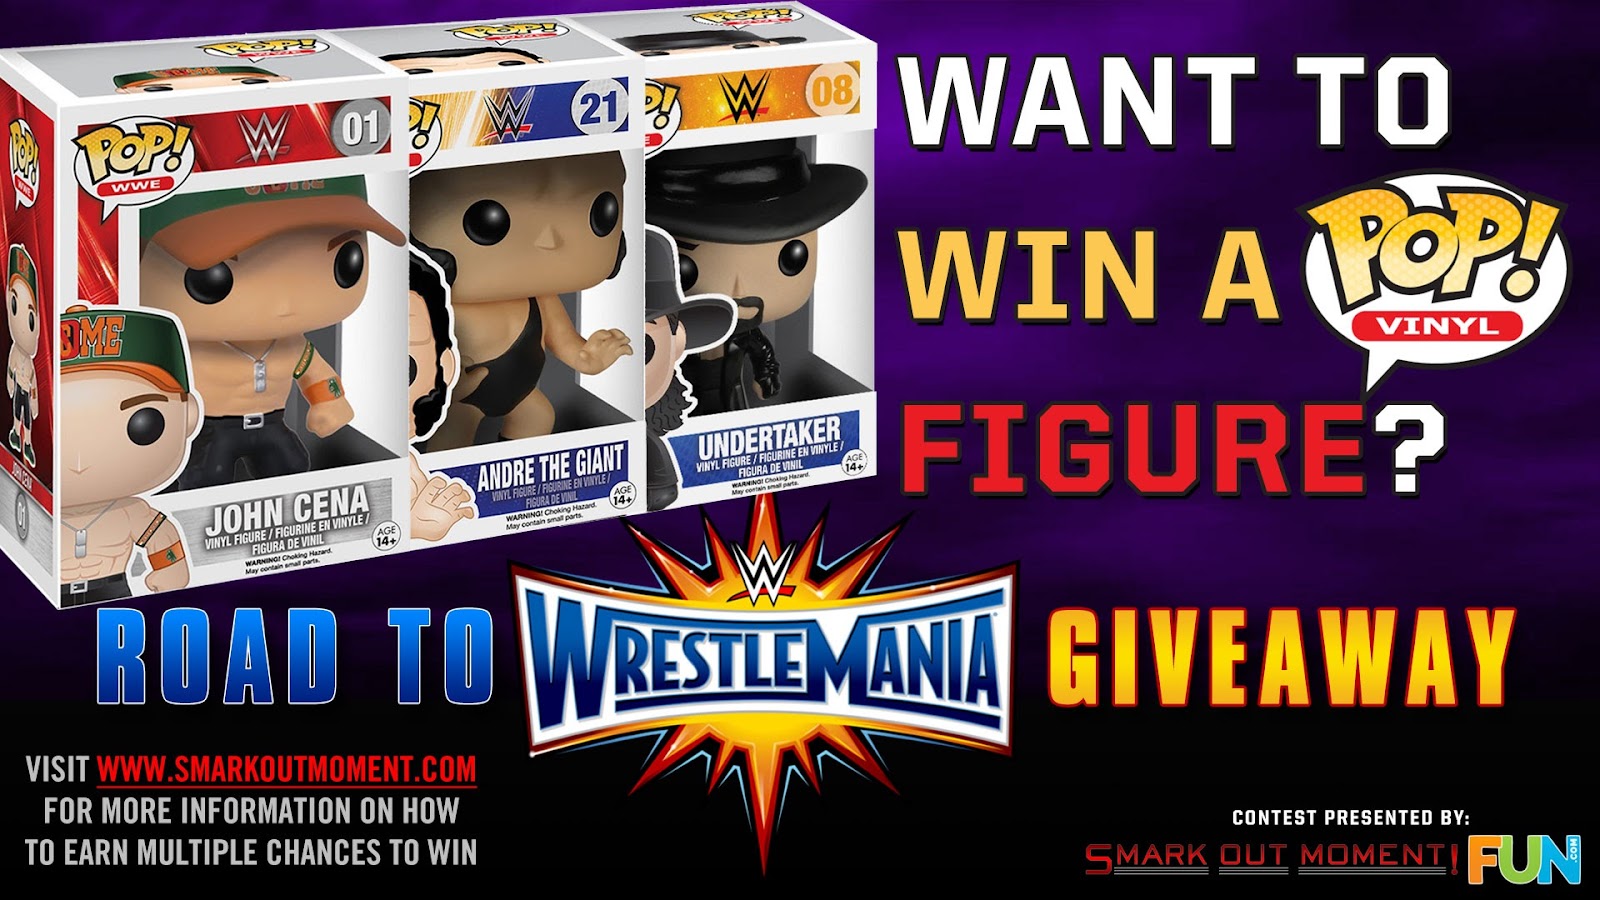 Win Free WWE Funko Pop Vinyl Figures Giveaway! Road to WrestleMania Contest Smark Out Moment